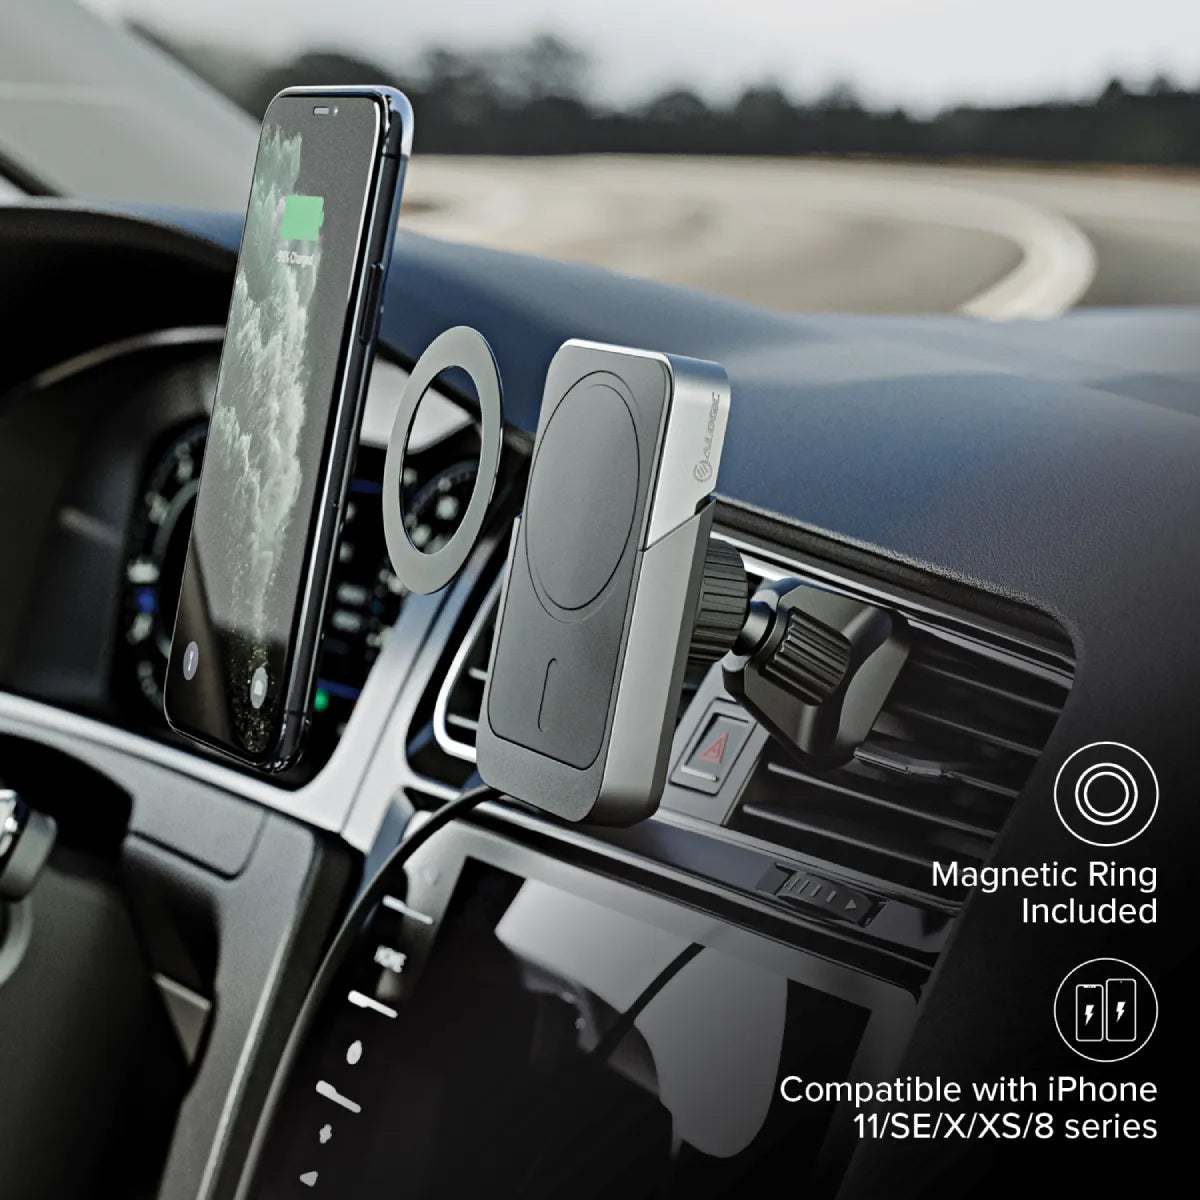 ALOGIC MSCCM - Matrix Magnetic Wireless Charger With Car Mount